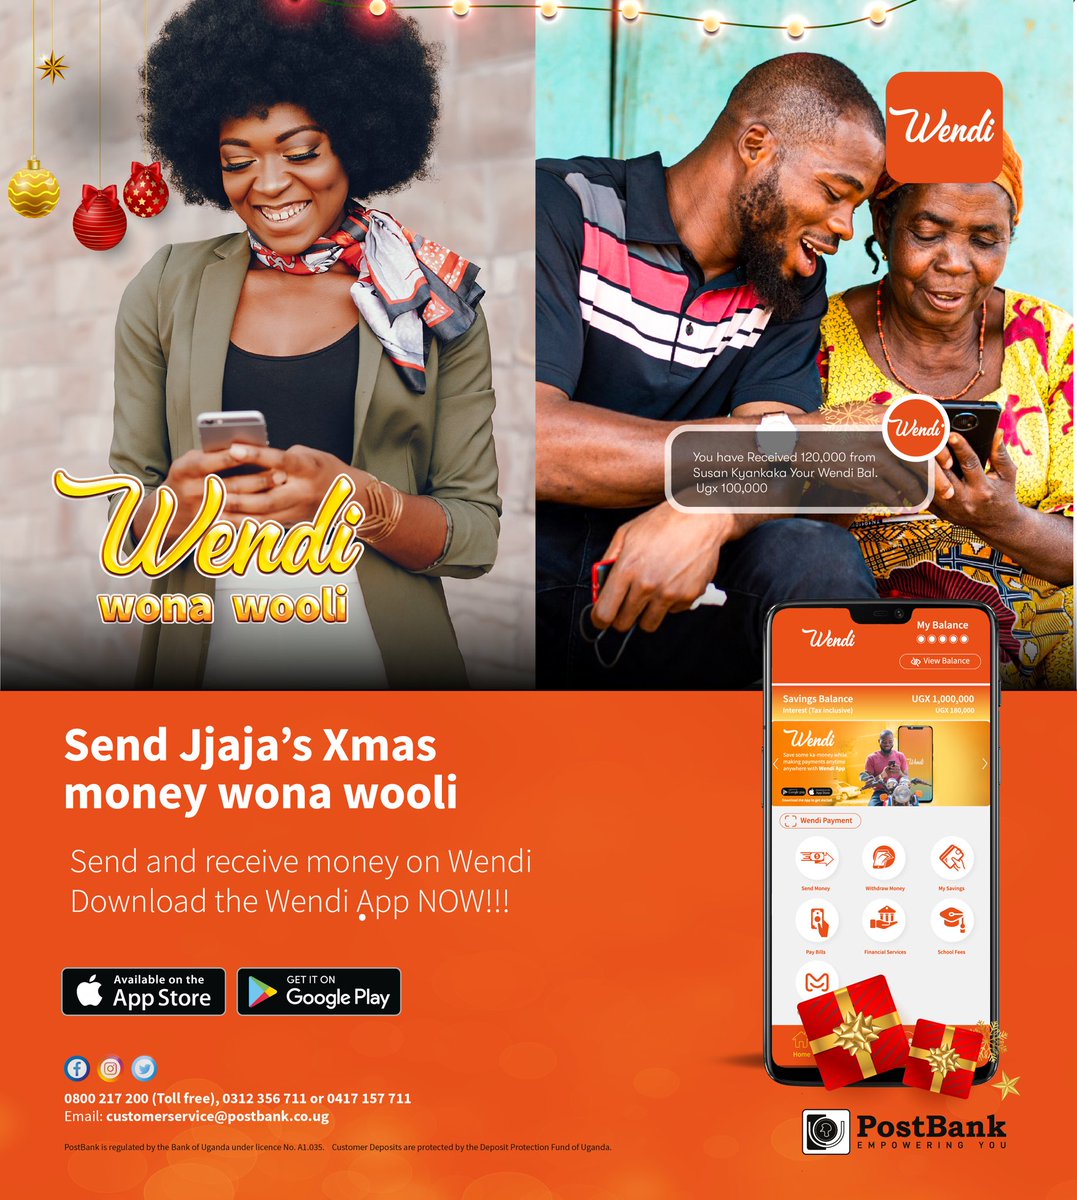 No need for bus rides or boda battles. Make Jaja’s Christmas special and joyful from wherever you are. Download Wendi and send money fast and worry-free! #WendiWonaWooli